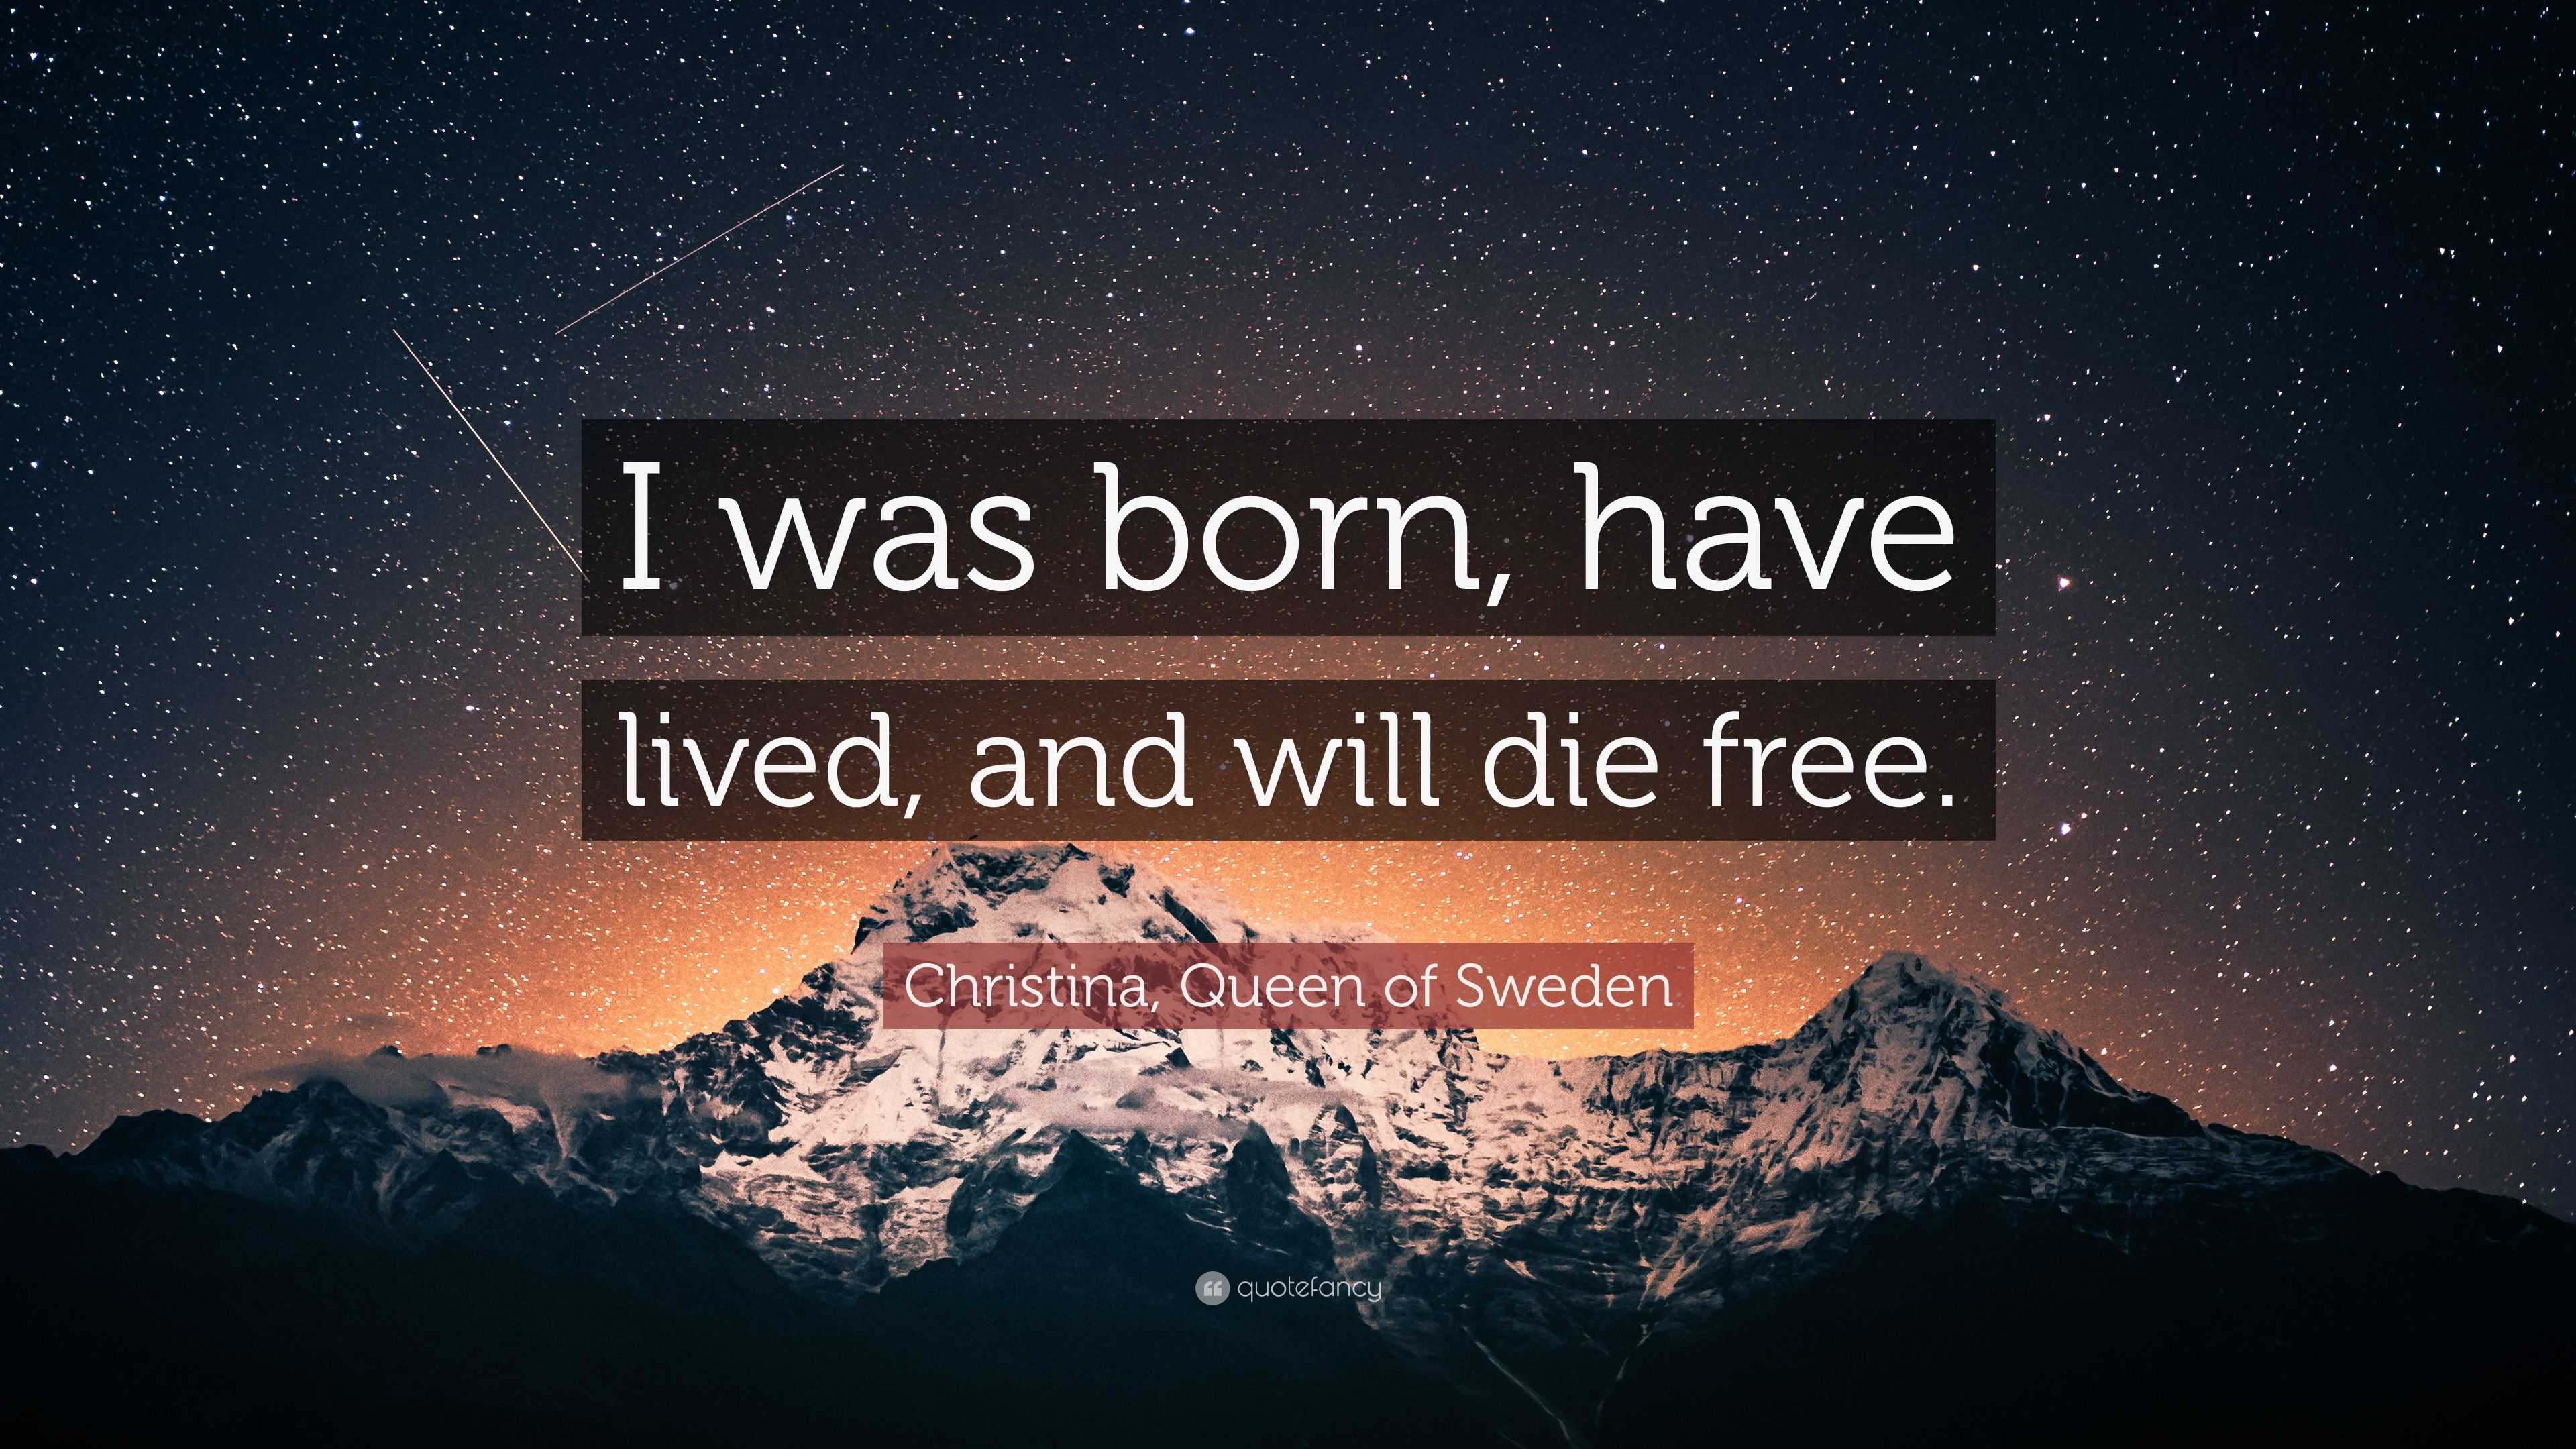 Christina, Queen of Sweden Quote: “I was born, have lived, and will die free .”